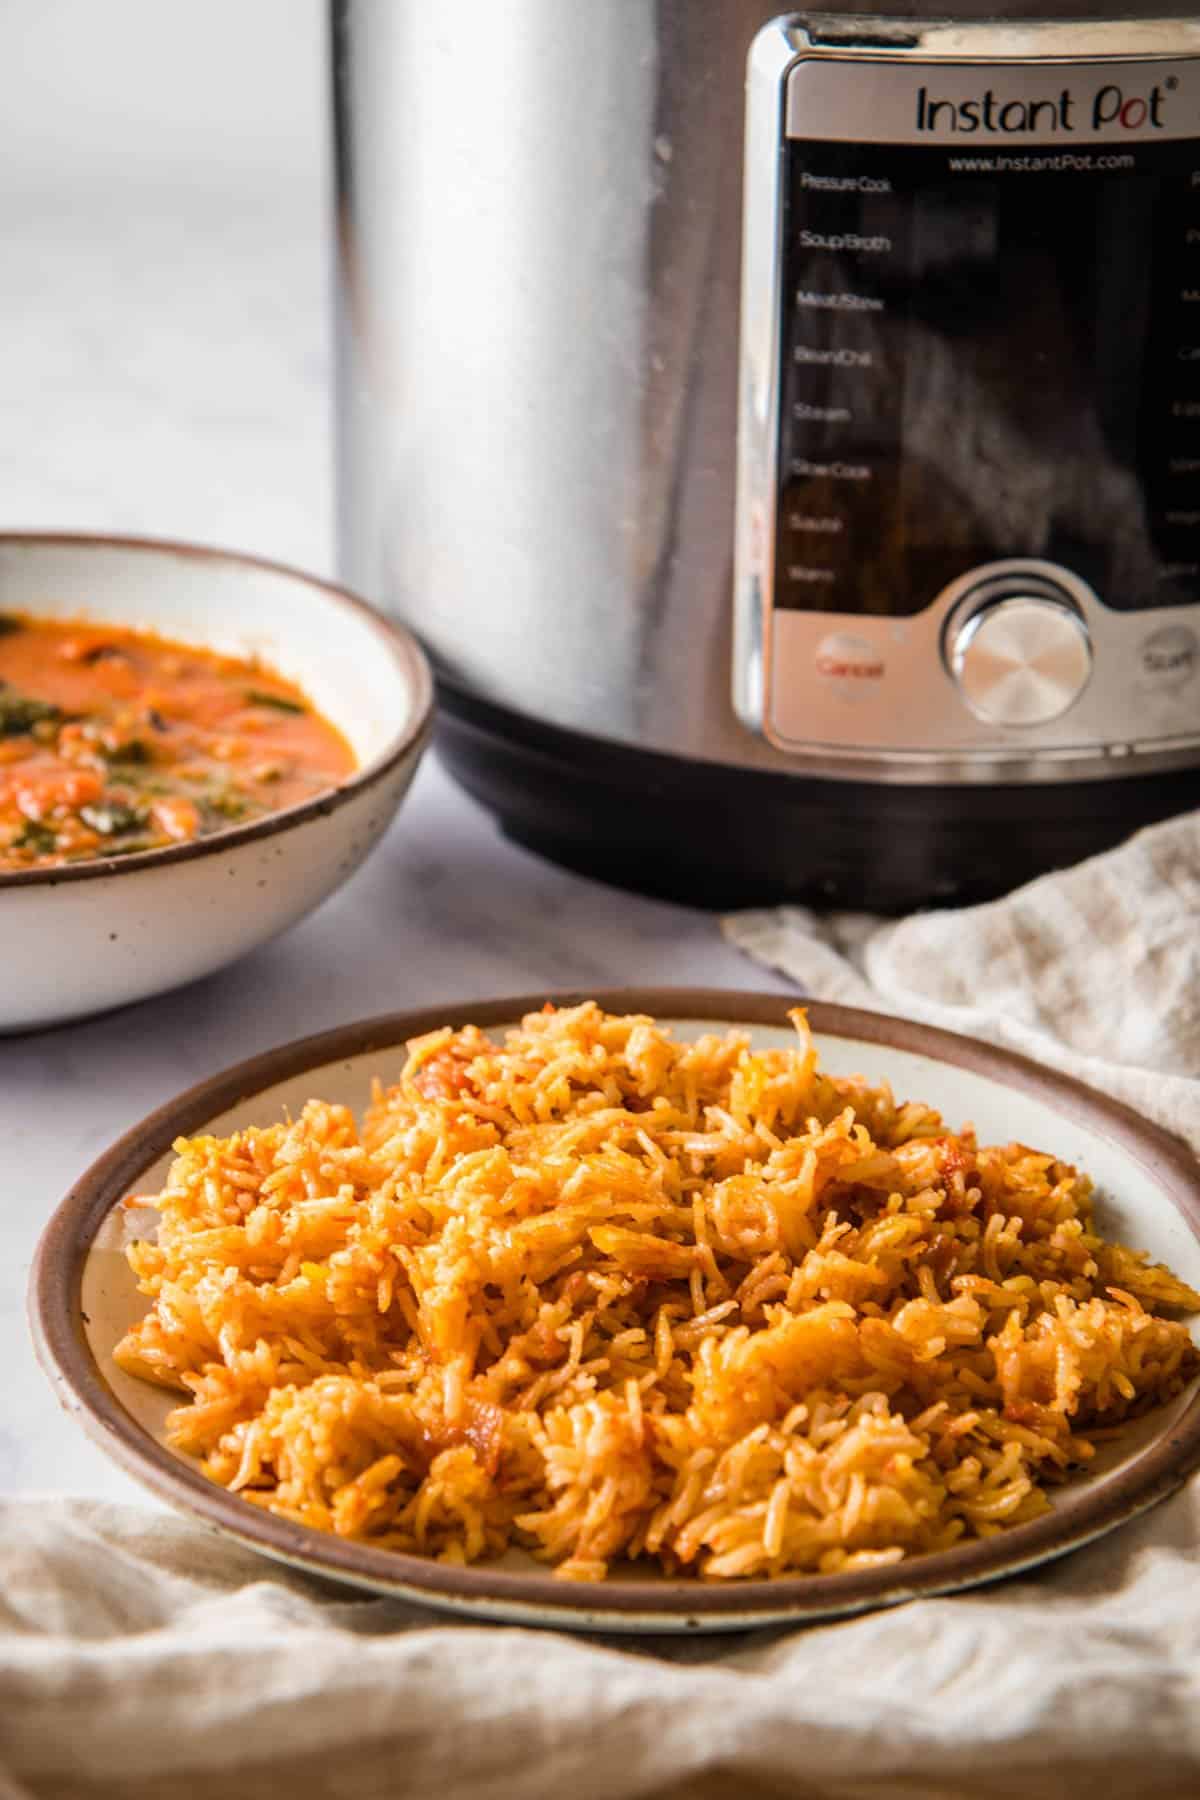 Bowl of Jollof Rice with Instant Pot and a bowl of a stew in the background